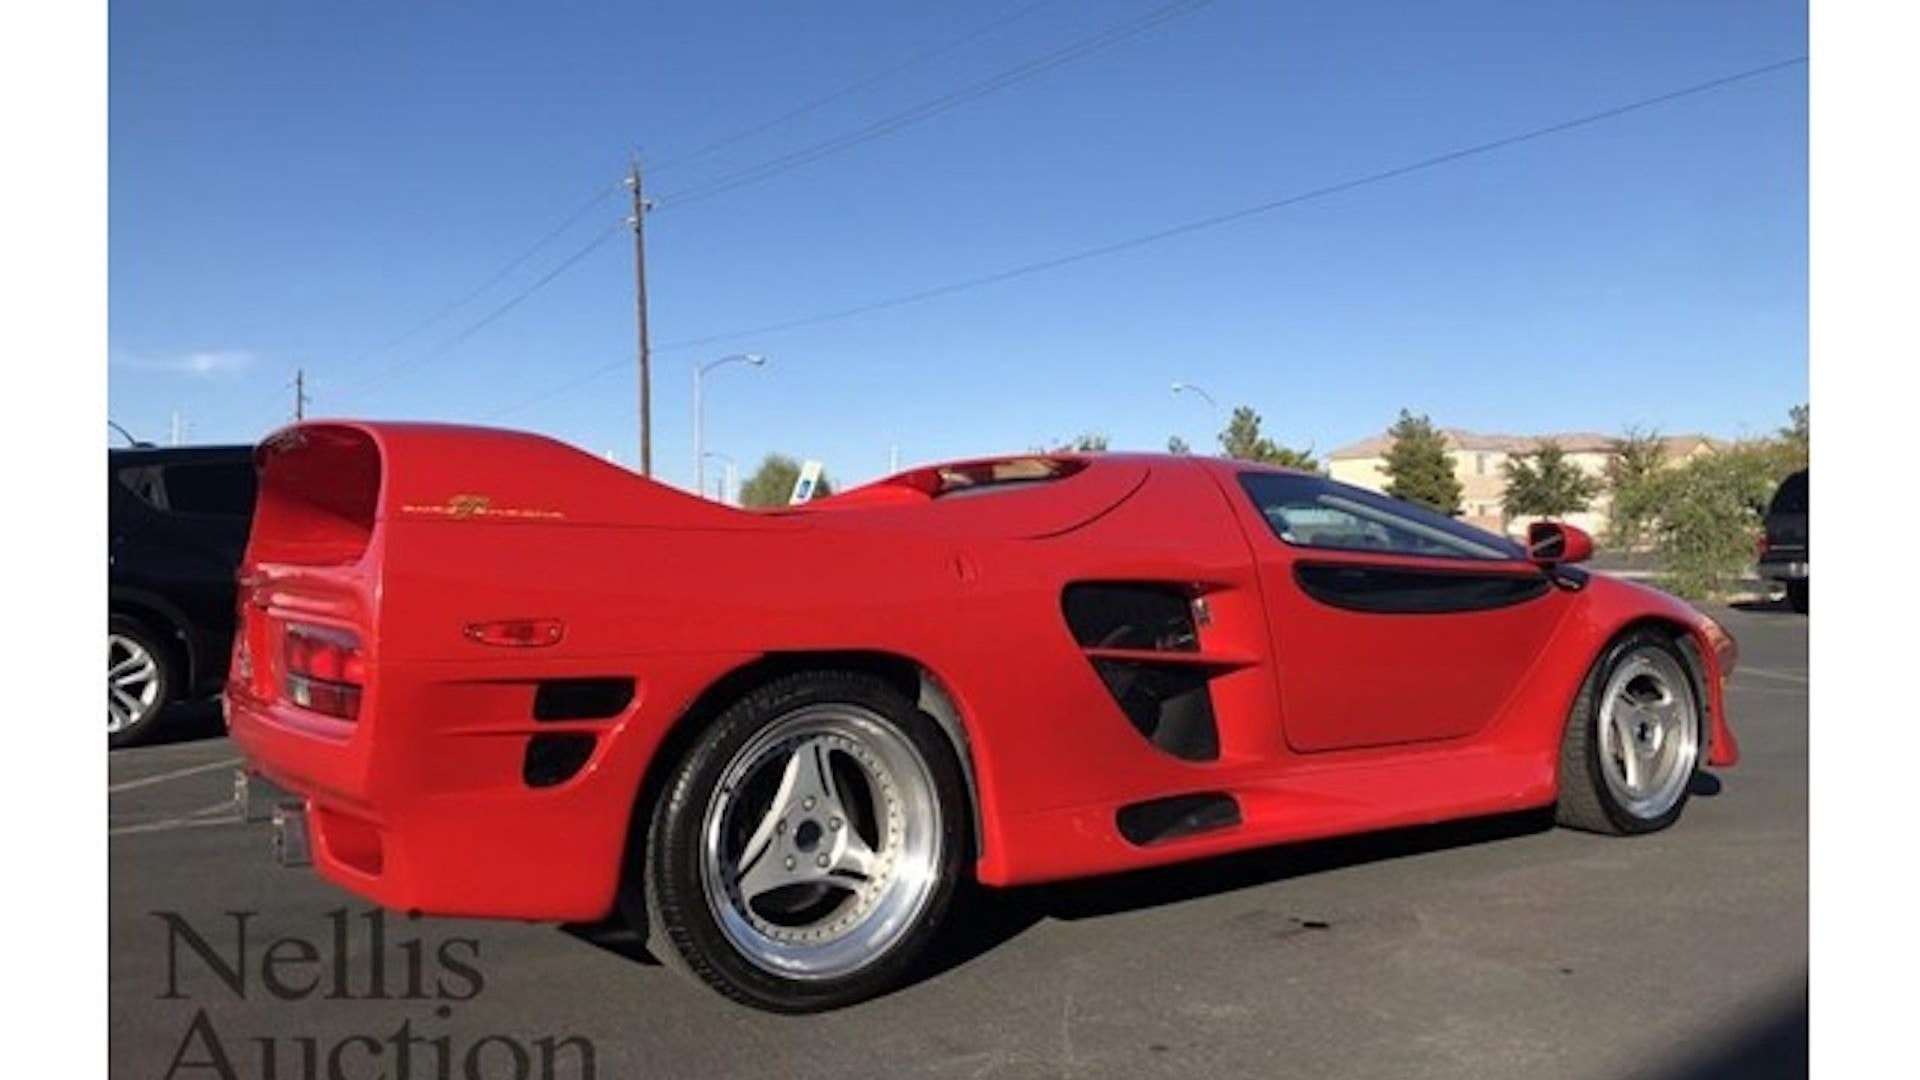 1996 Vector M12 headed to auction